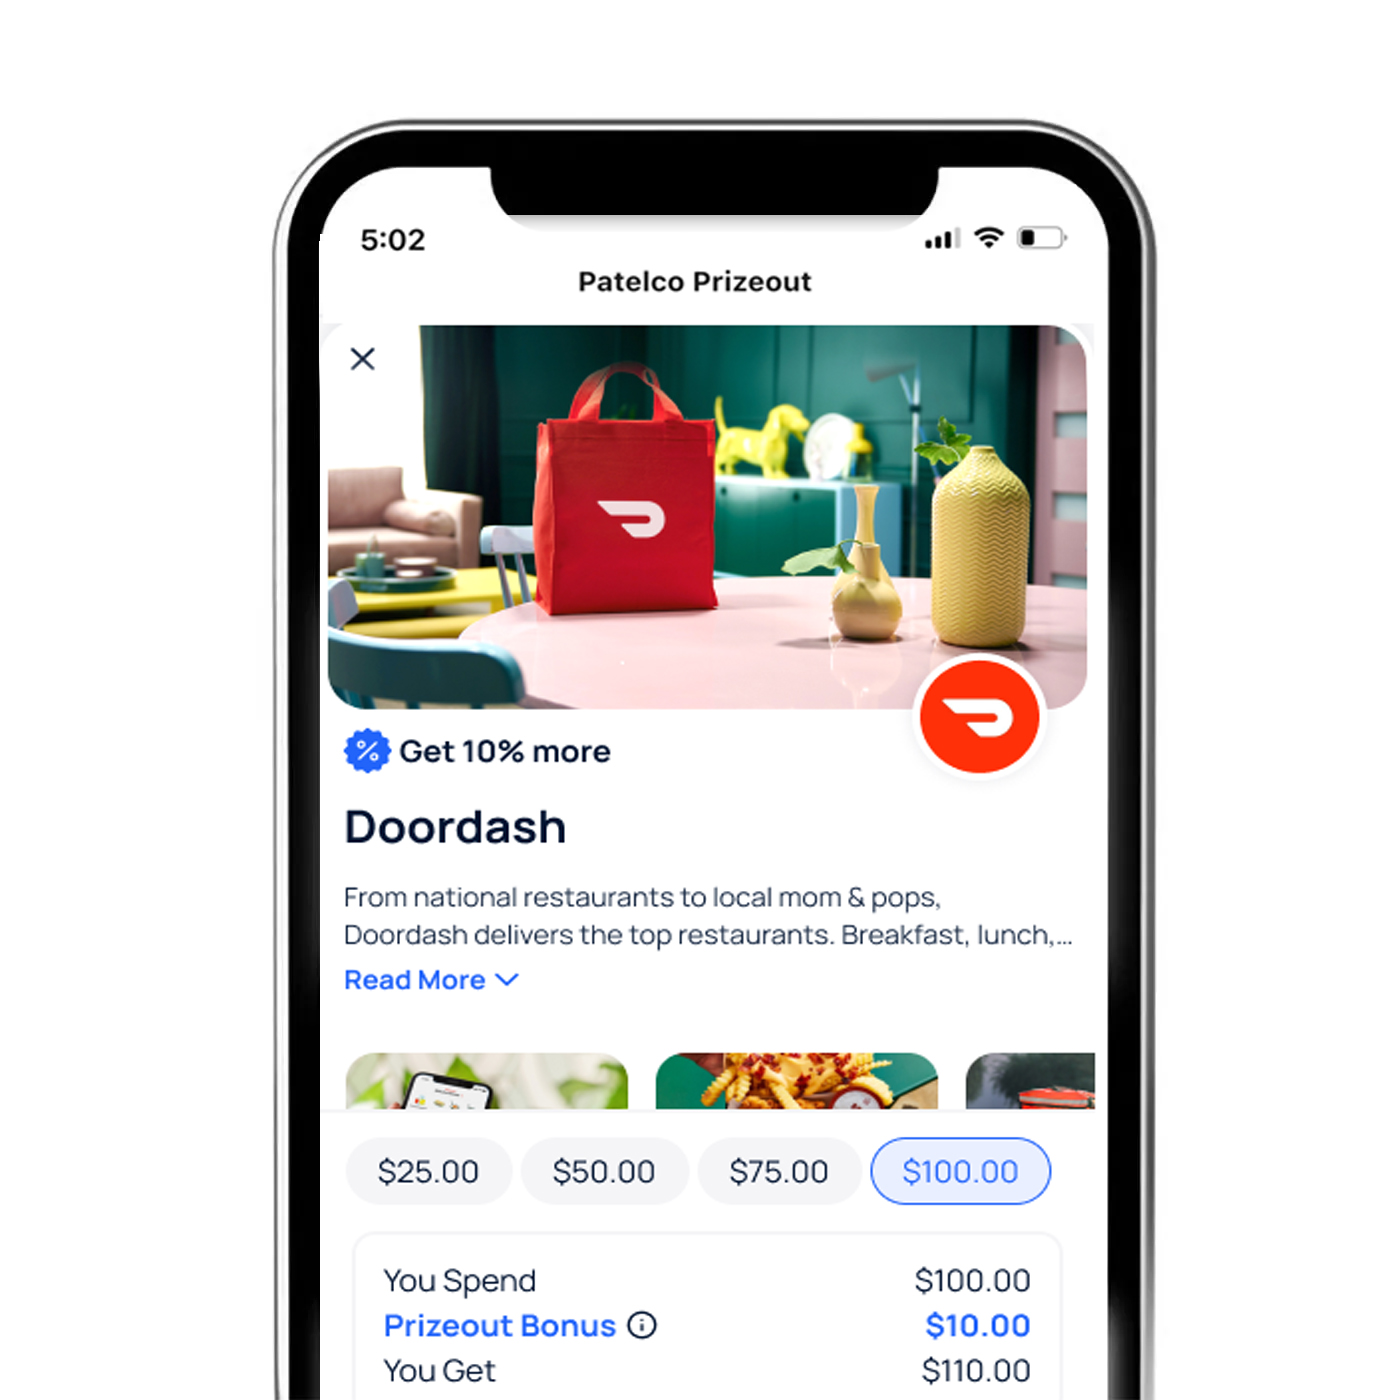 A screenshot of the Patelco Mobile App displaying how to redeem Doordash points with Prizeout